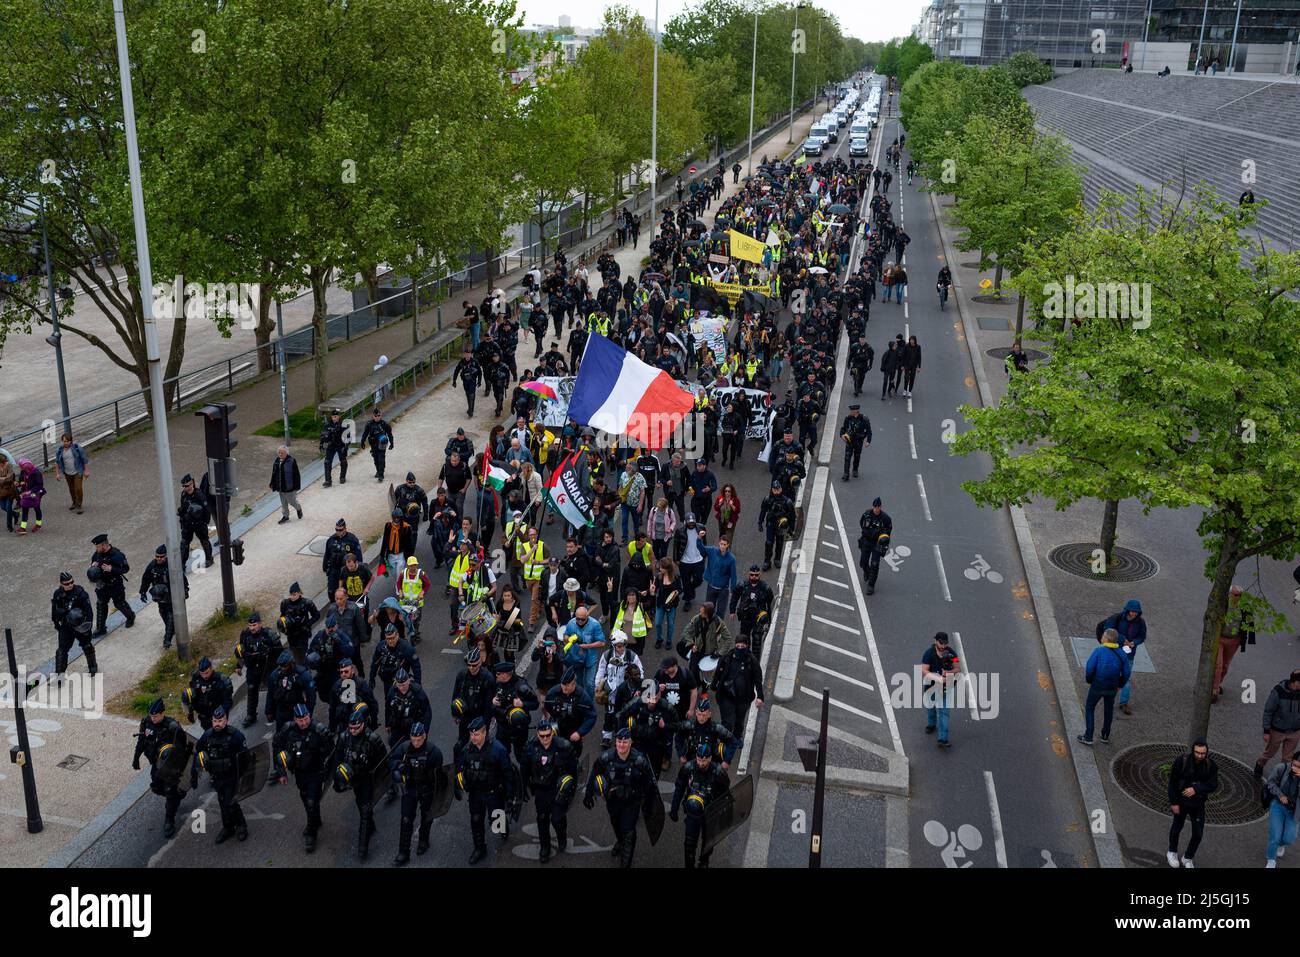 The "Gilet Jaunes" (Yellow Vests) movement holds a rally ahead of the  Sunday election ballot between presidential candidates Emmanuel Macron and  Marine Le Pen in Paris, France on April 23, 2022. The (